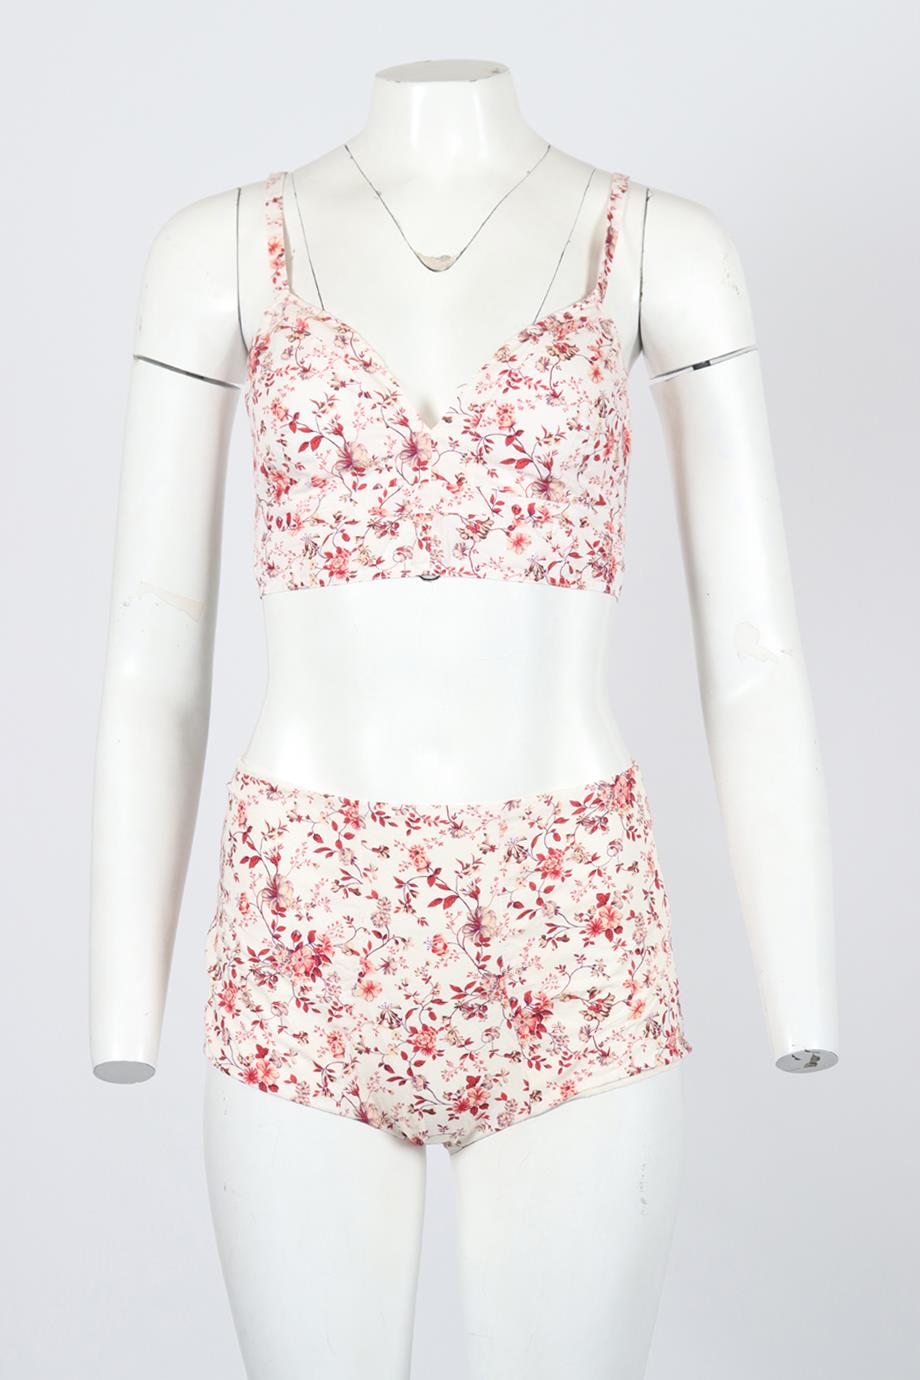 ETRO PRINTED COTTON TOP AND SHORTS IT 40 UK 8